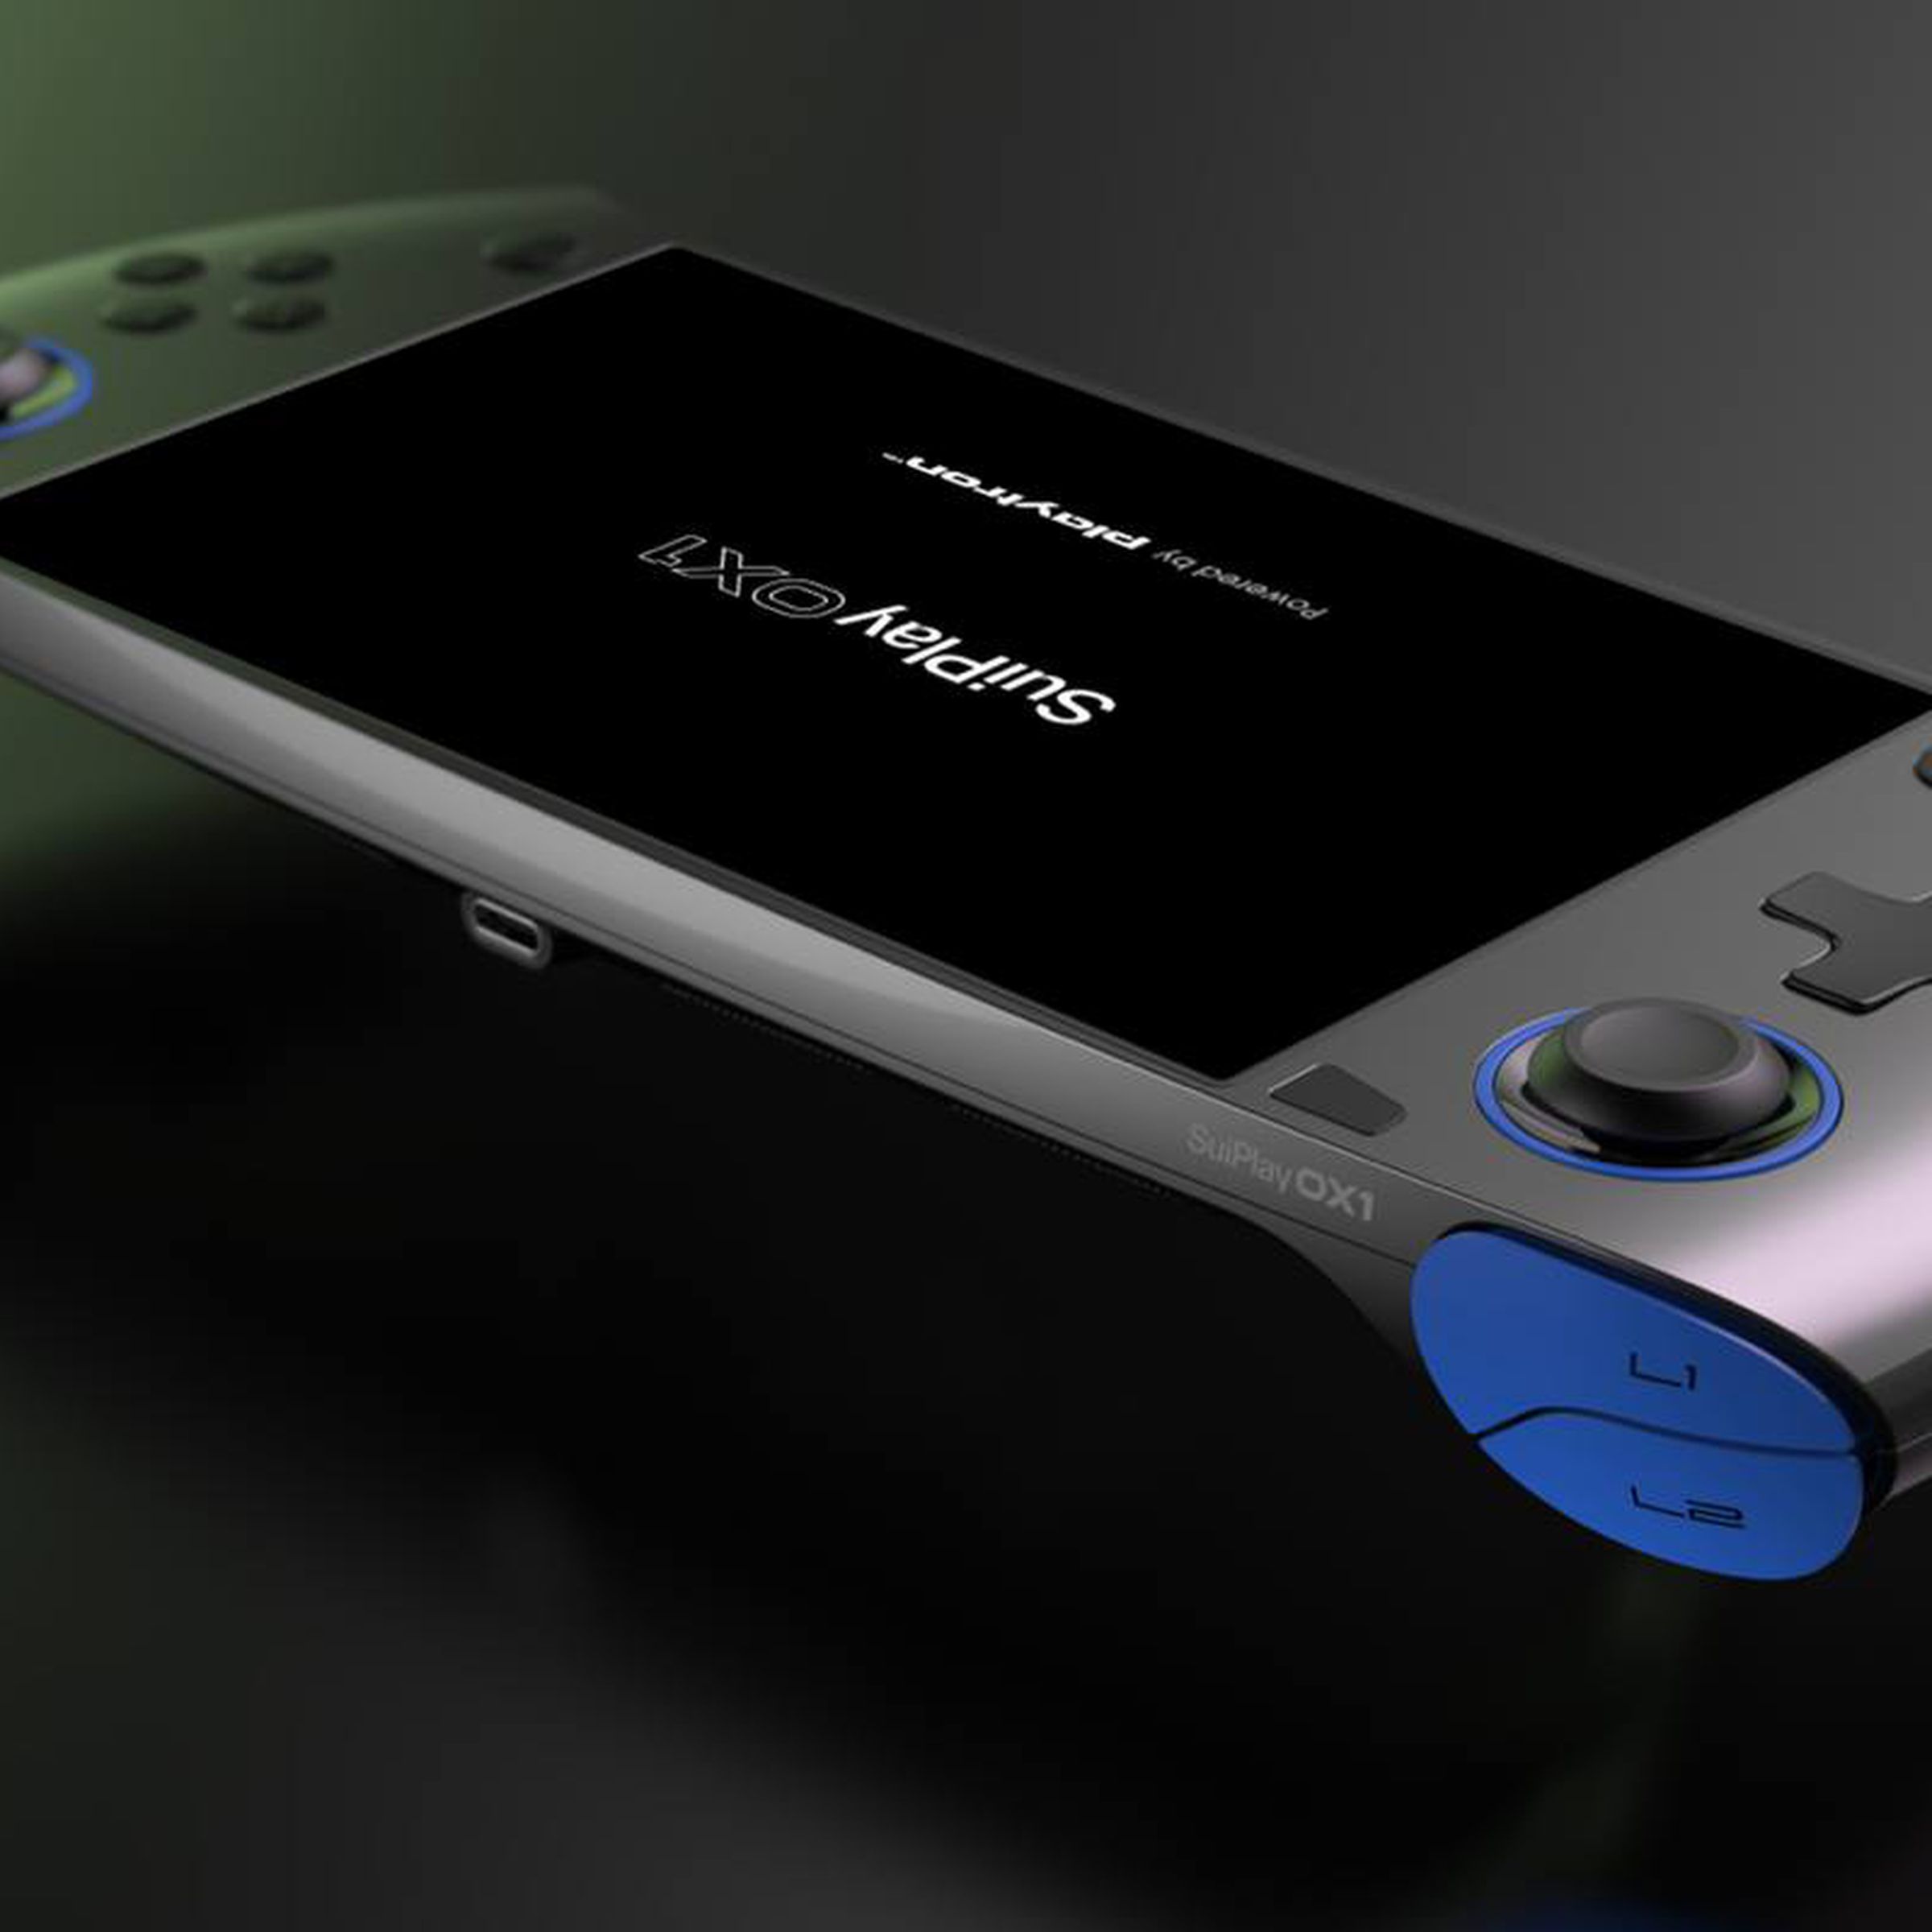 An early render of the SuiPlay0X1.